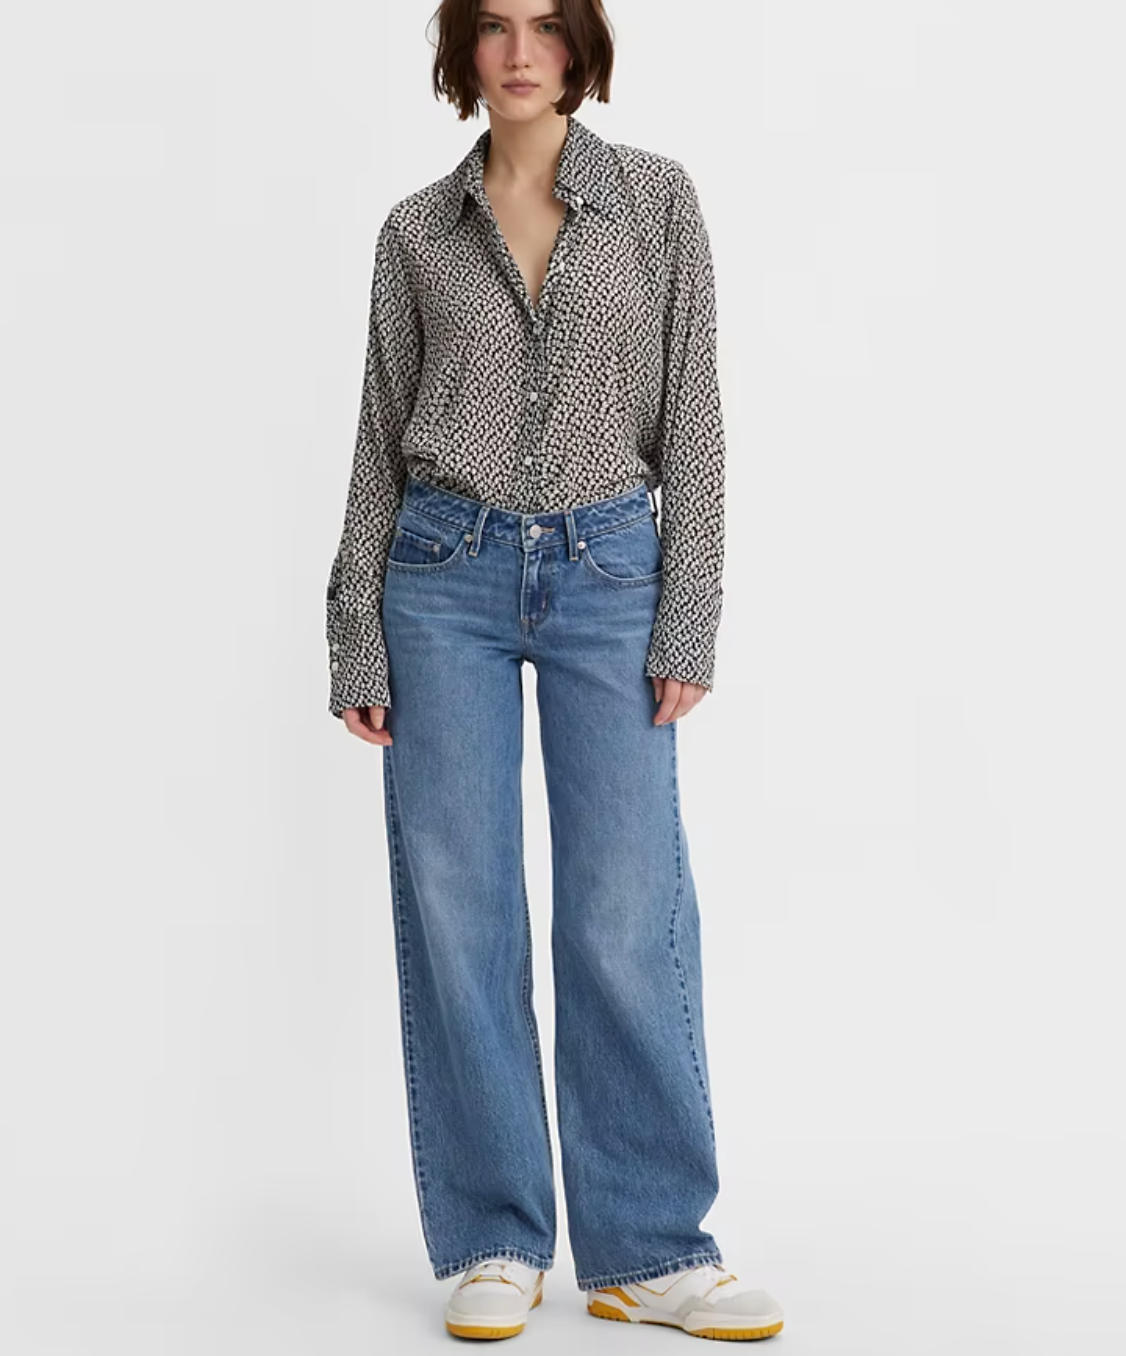 13 Petite Wide Leg Jeans You Won't Have To Tailor - Starting at $27 ...